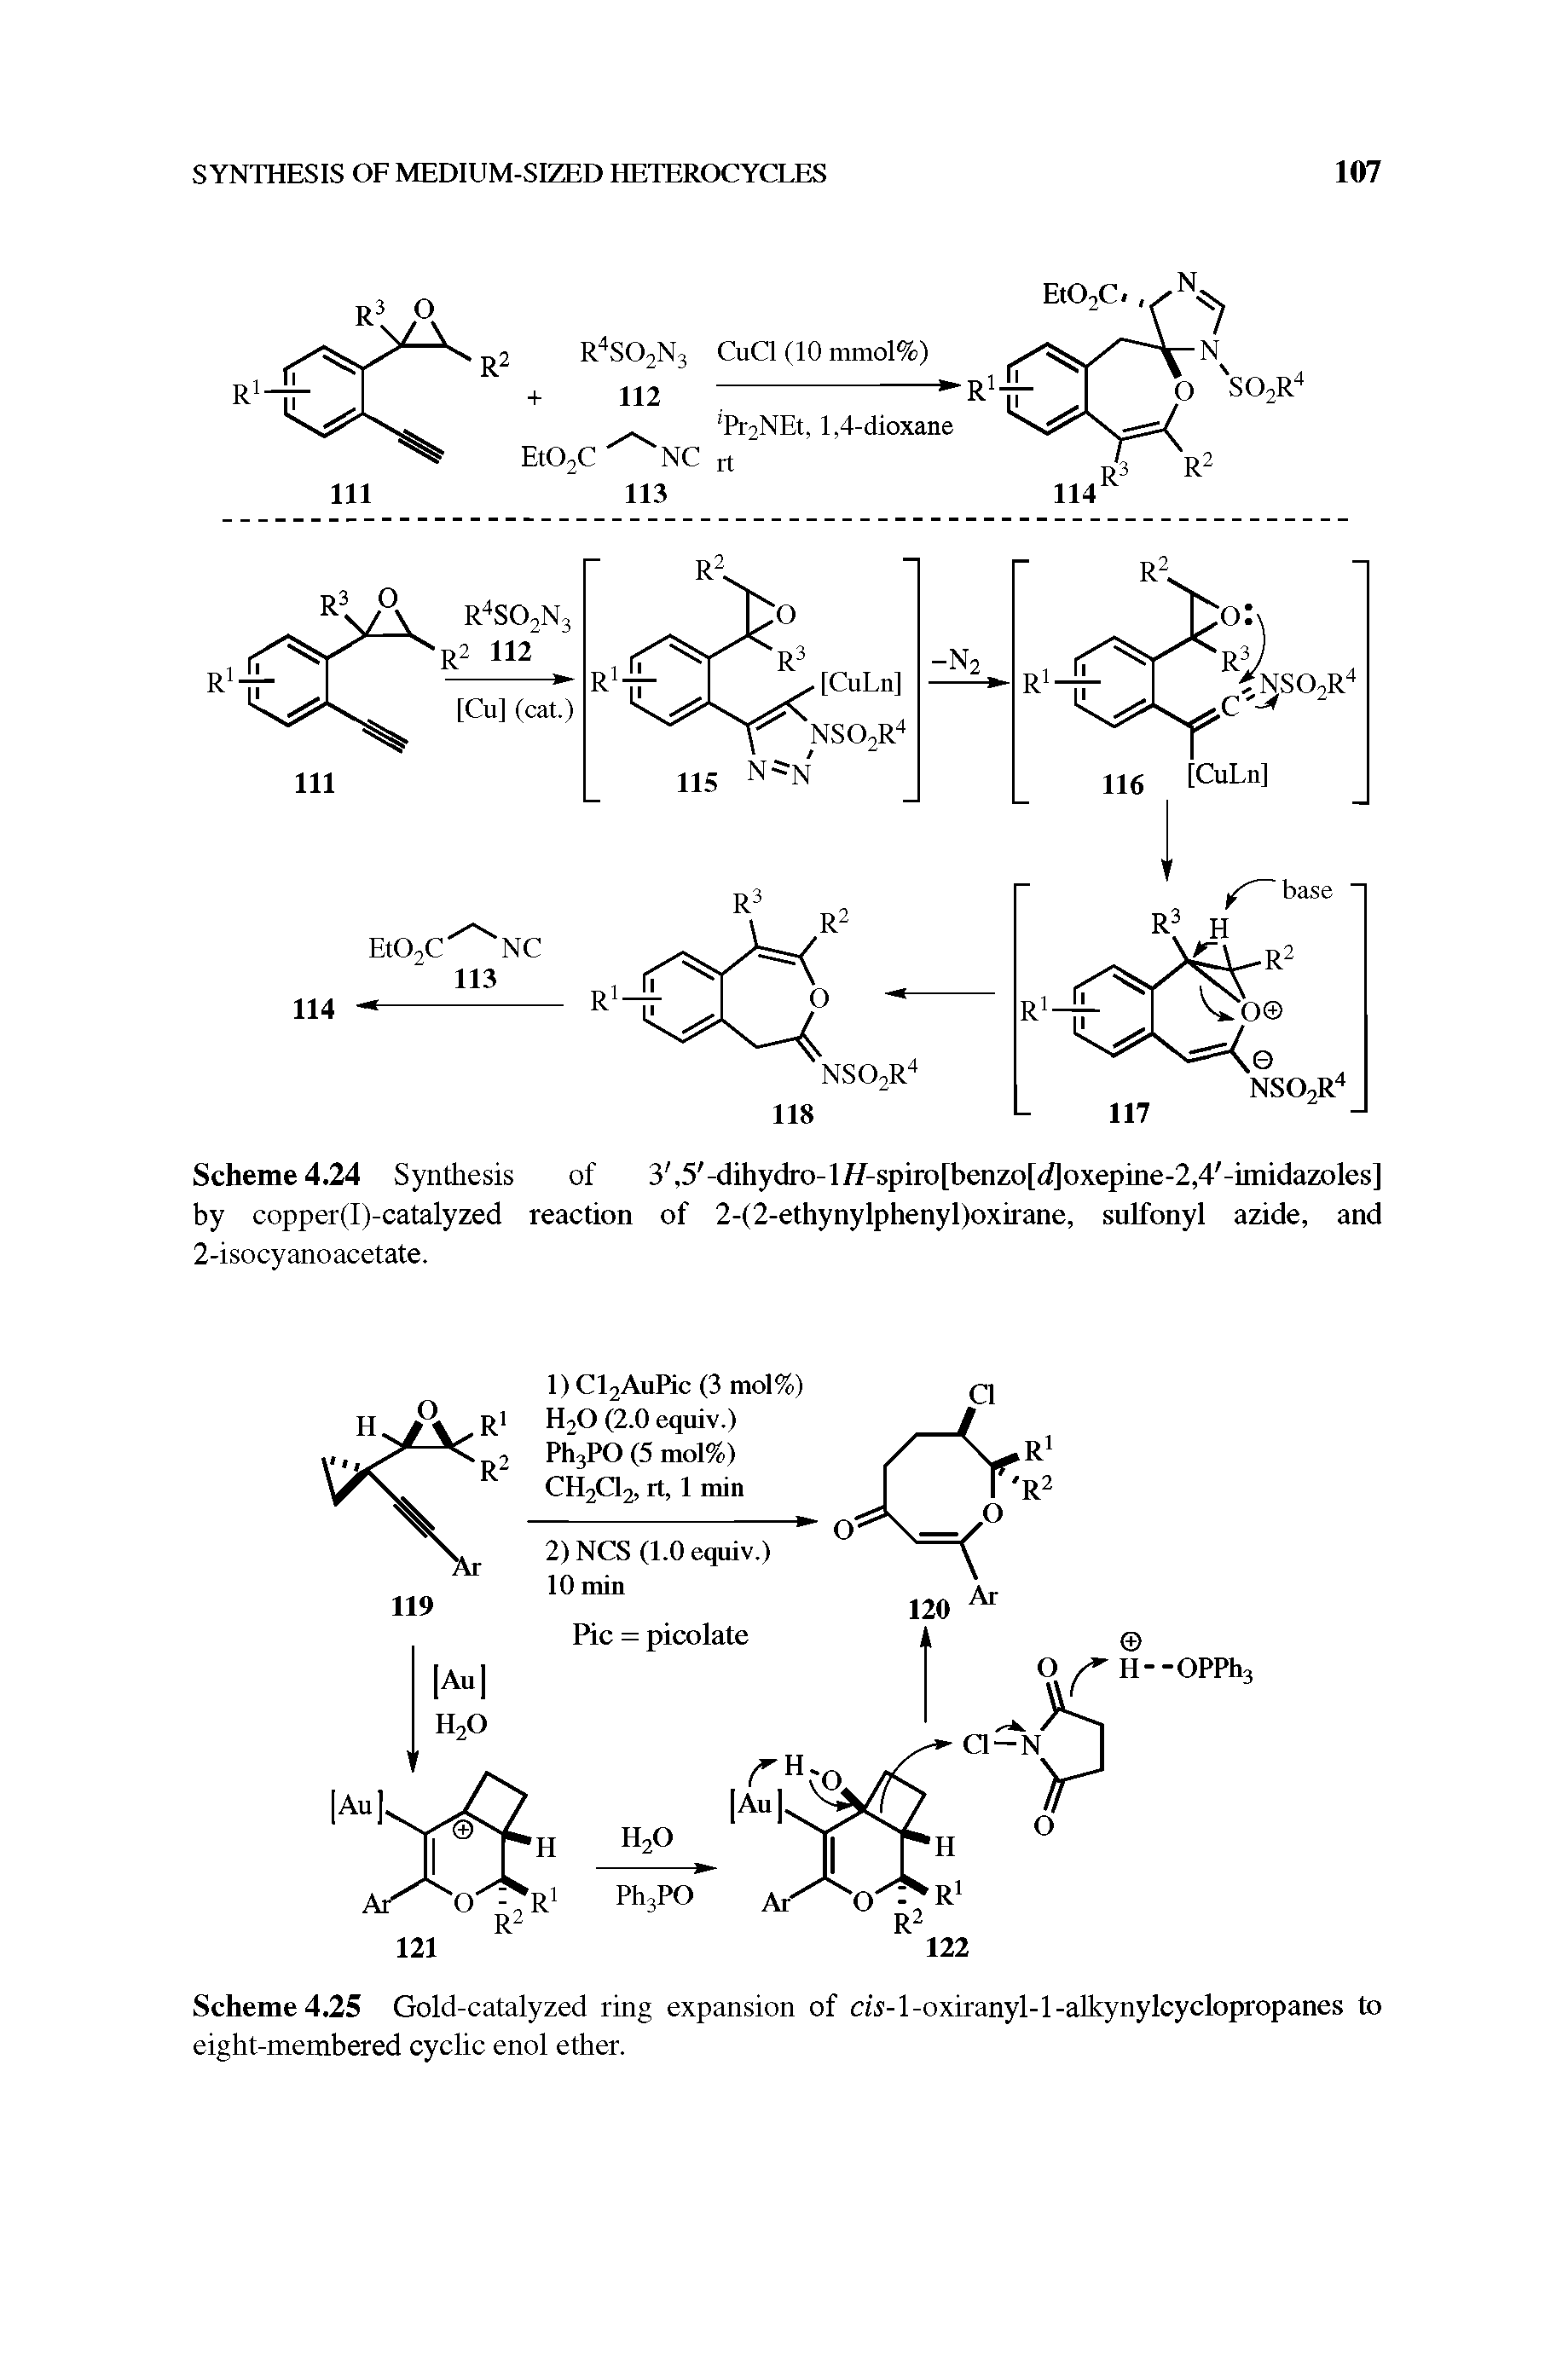 Scheme 4.25 Gold-catalyzed ring expansion of cw-l-oxiranyl-l-aUcynylcyclopropanes to eight-membered cyclic enol ether.